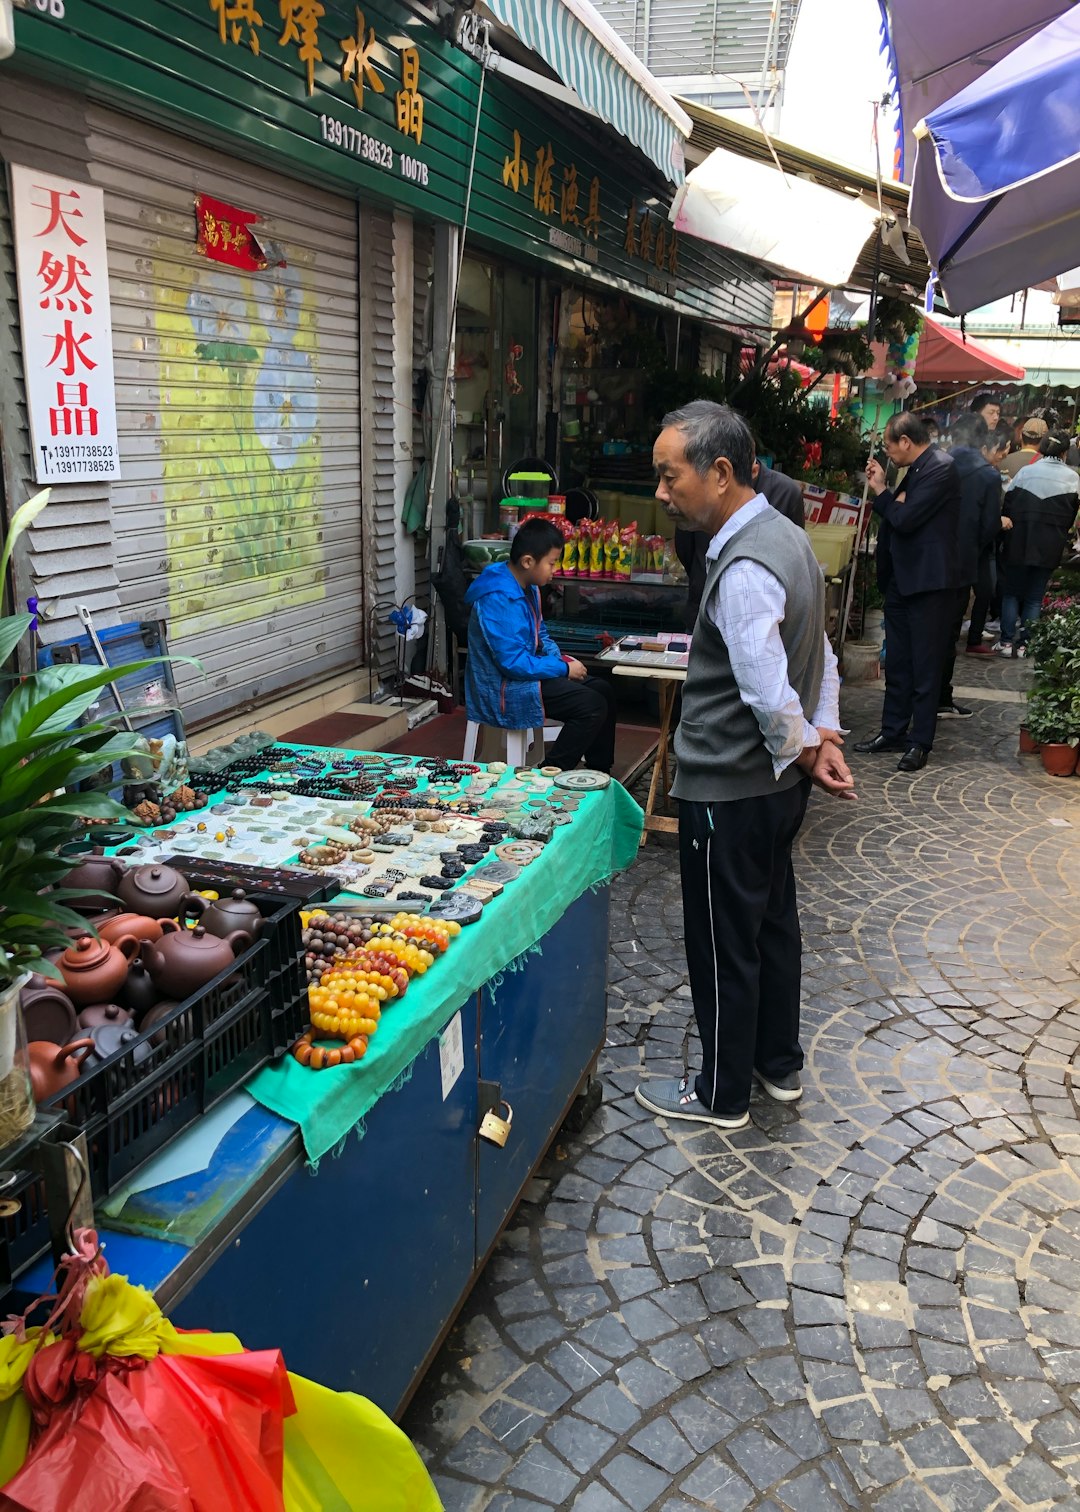 man in white dress shirt and black pants standing near green vegetable stand during daytime